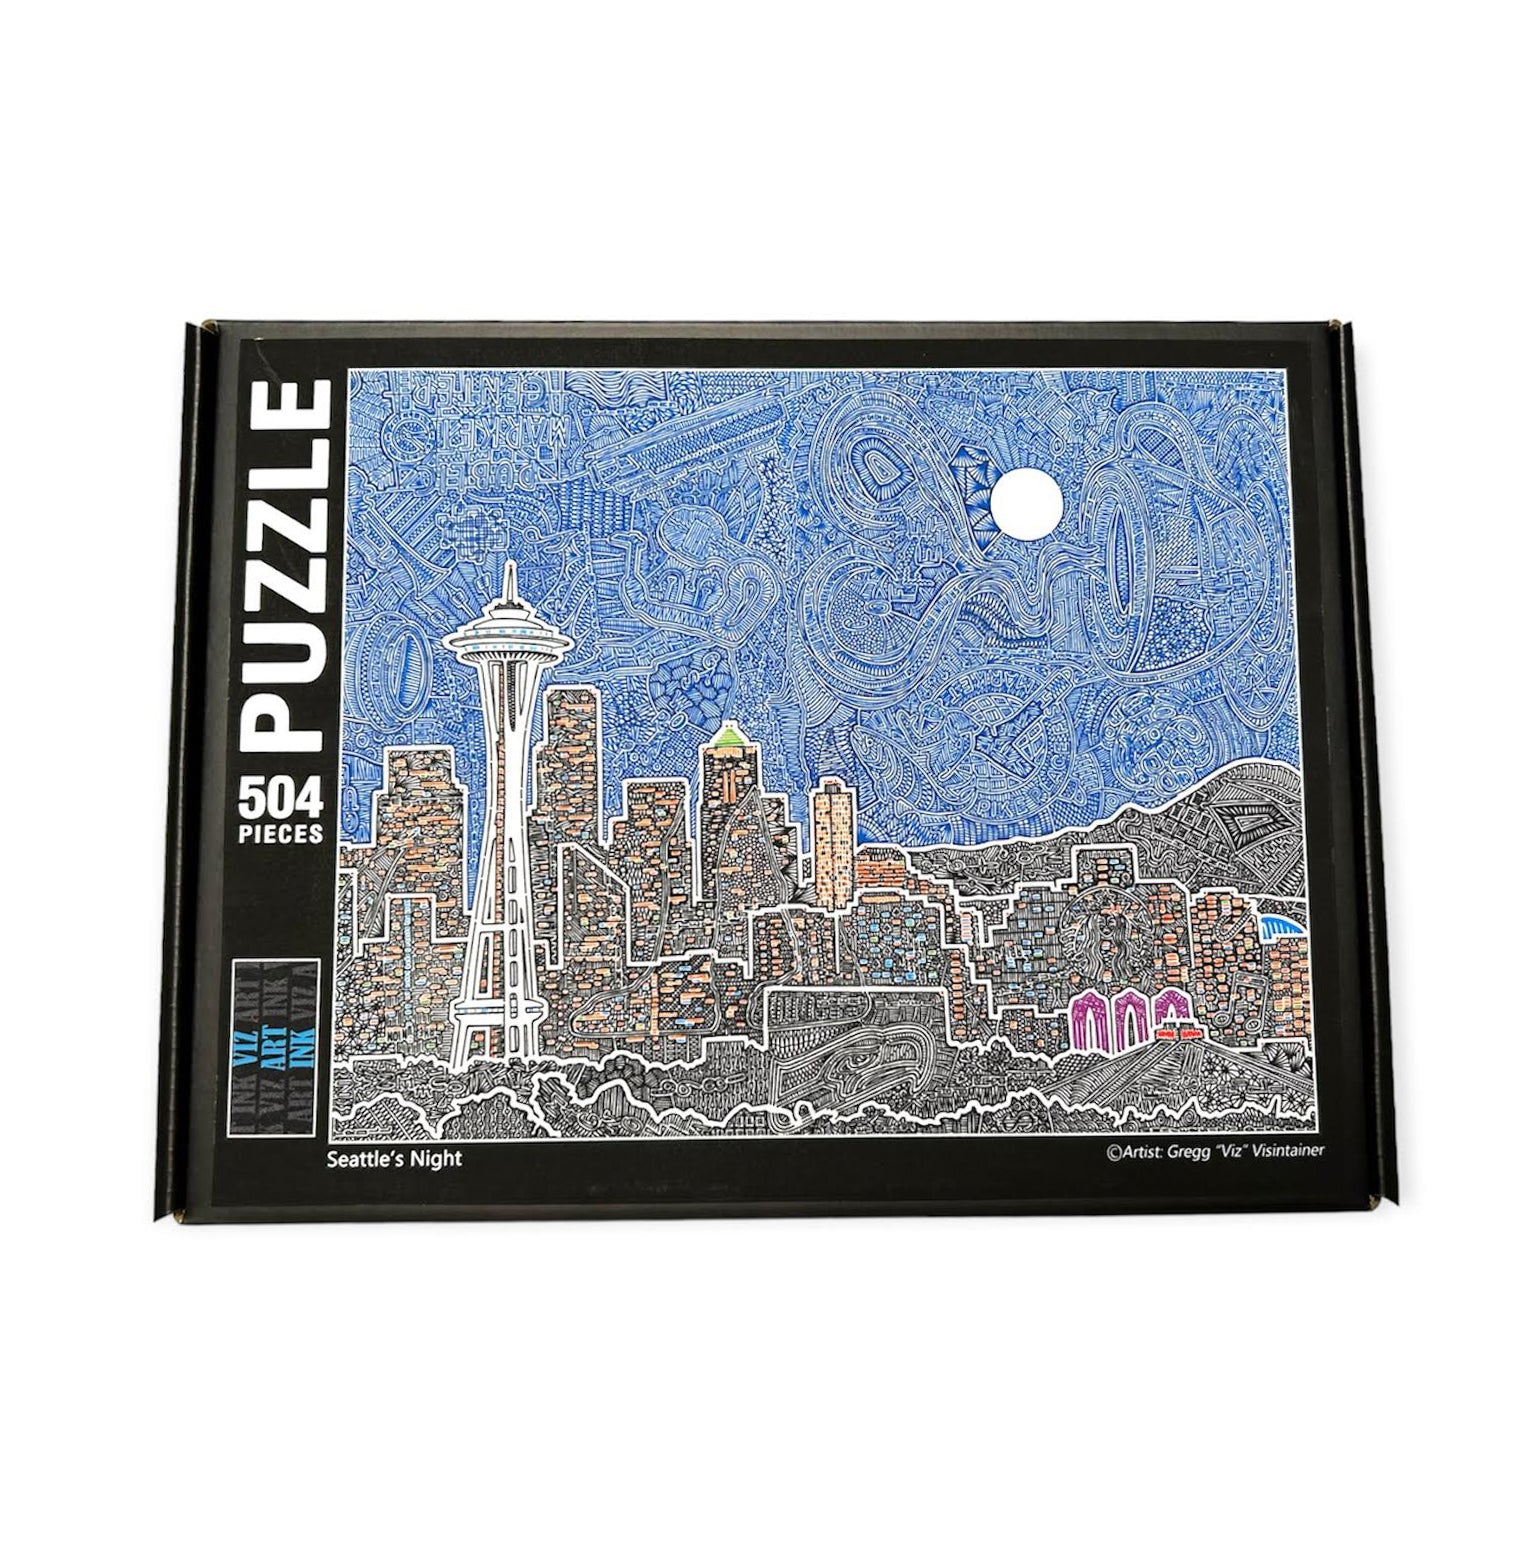 Puzzle (504 Pieces) - Seattle's Night